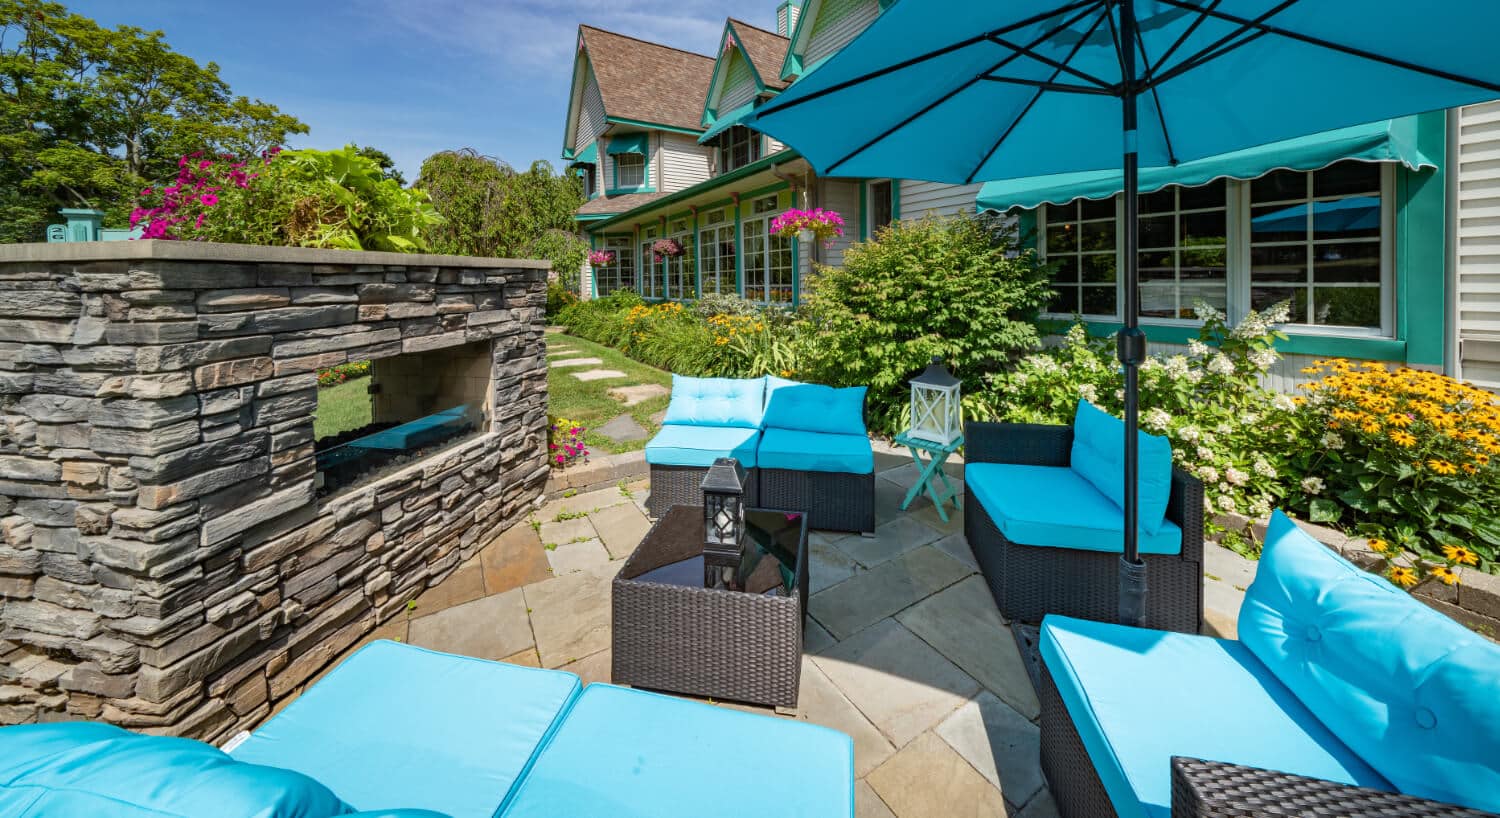 An outside patio area with wicker furniture with bright blue cushions and umbrella, facing a brick fireplace, green grass, bushes, and lots of flowers throughout.